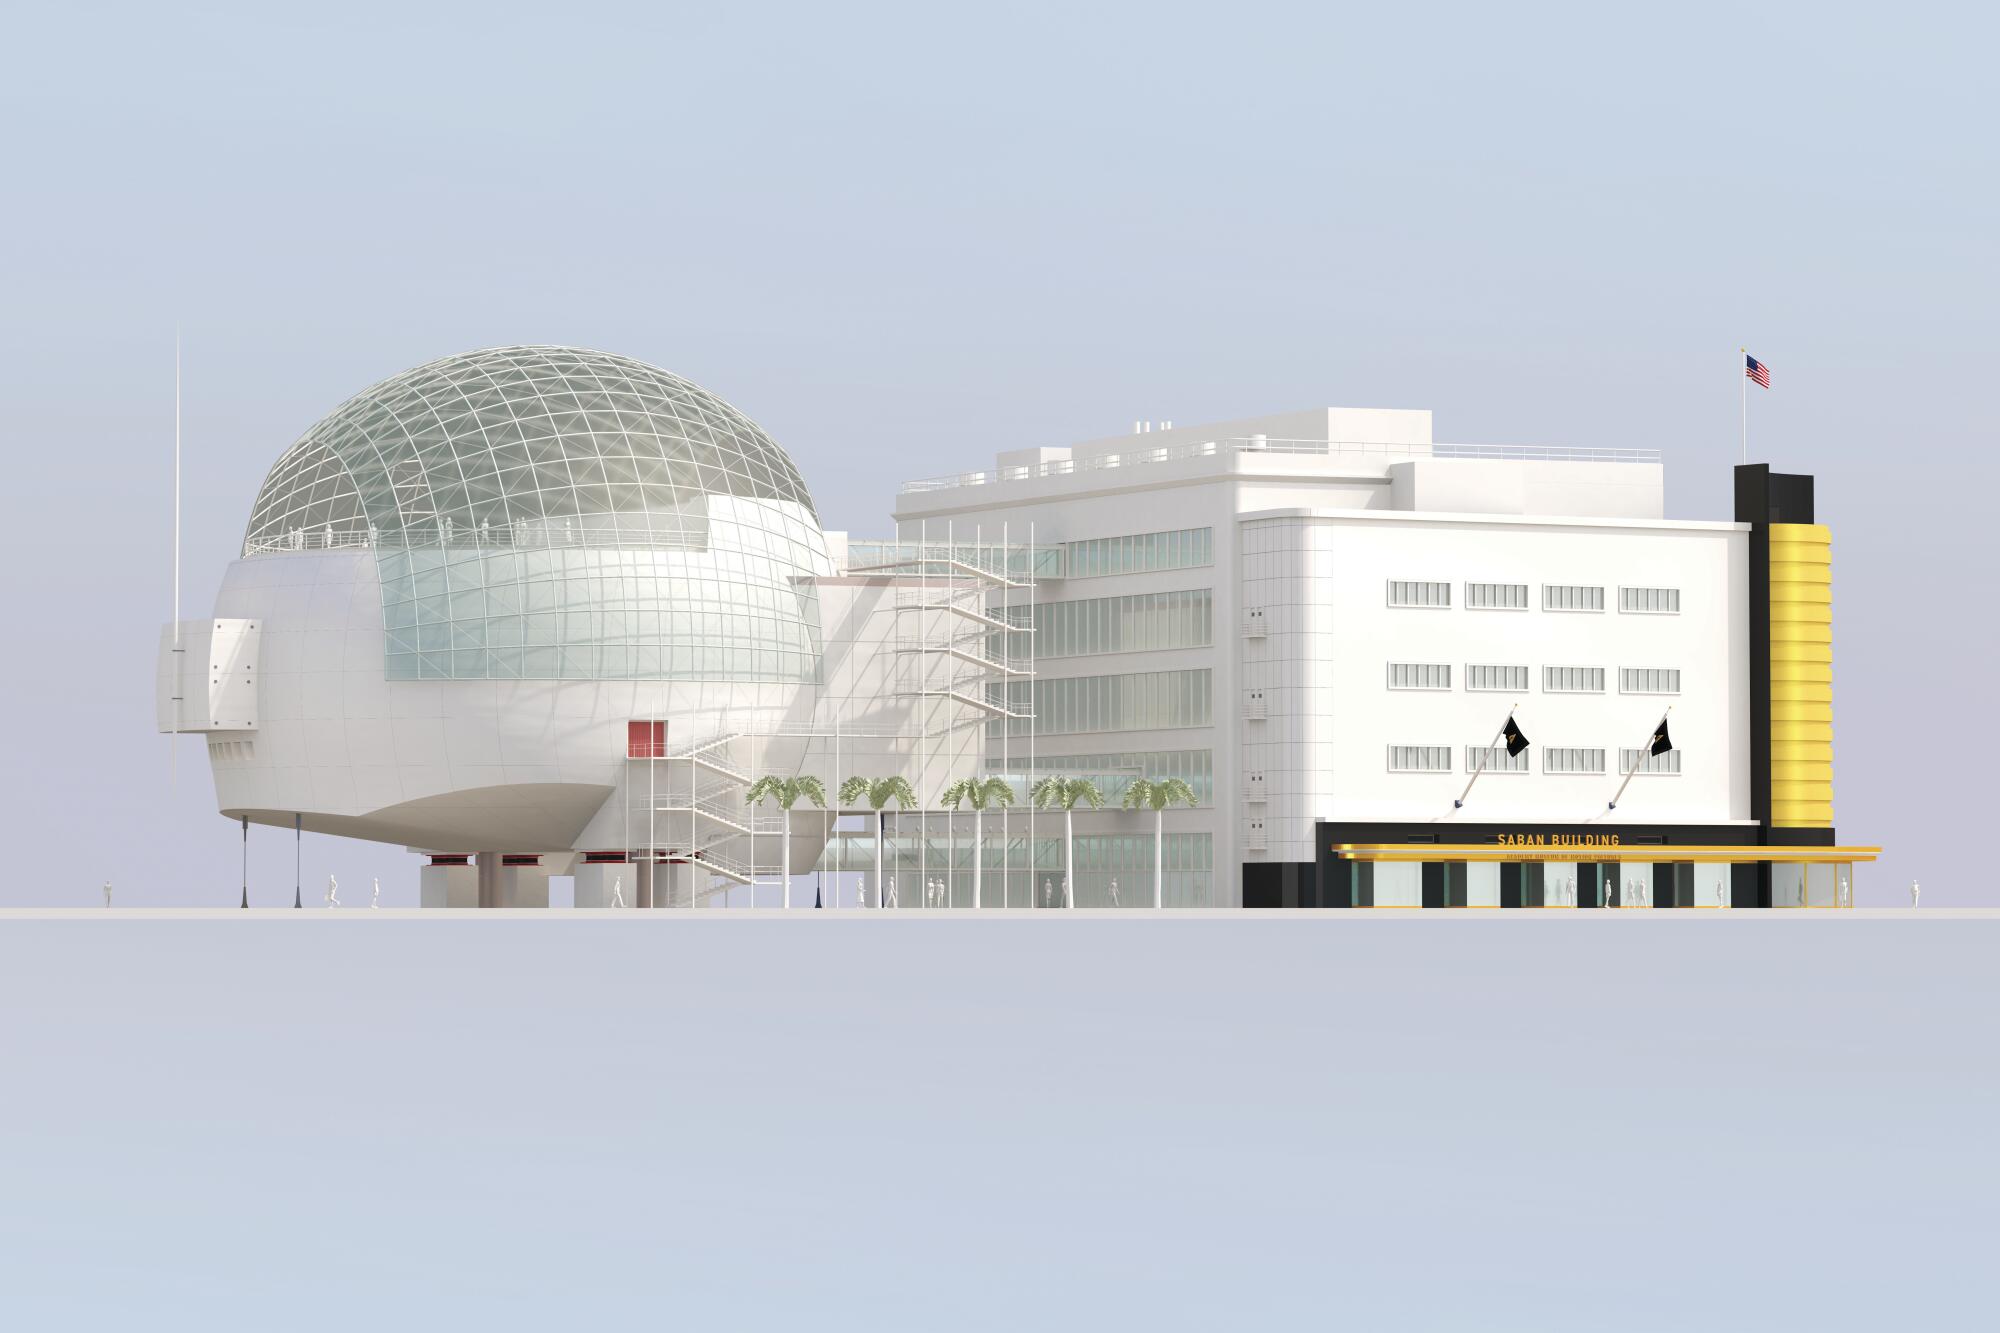 Illustration of the Academy Museum of Motion Pictures